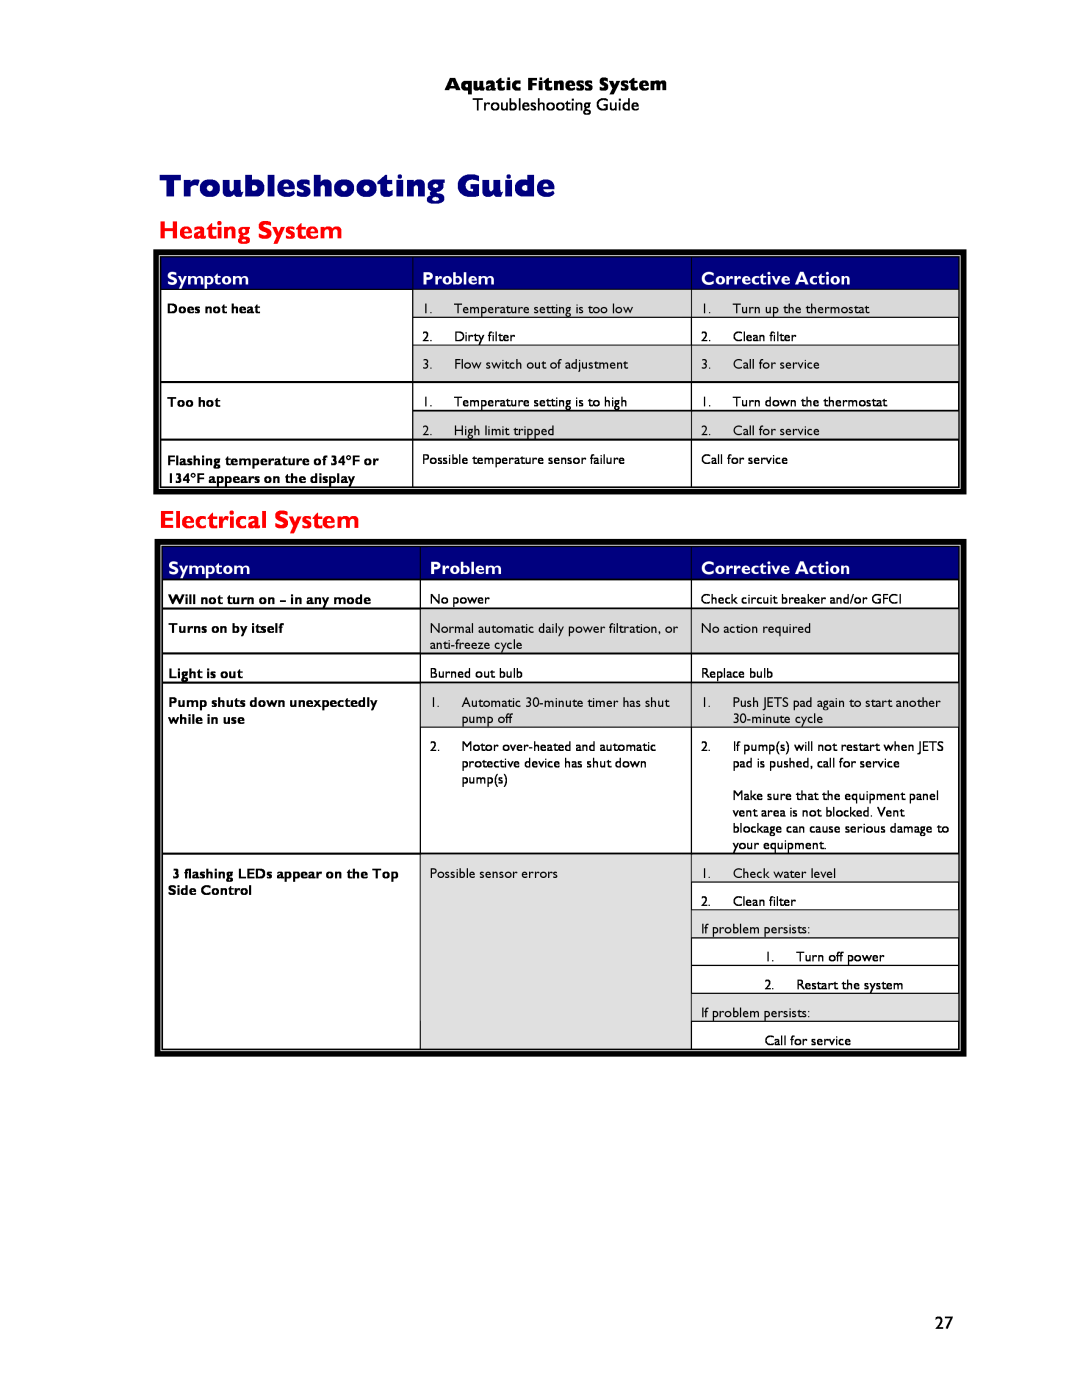 Dimension One Spas Aquatic Fitness System Troubleshooting Guide, Heating System, Electrical System, Symptom, Problem 